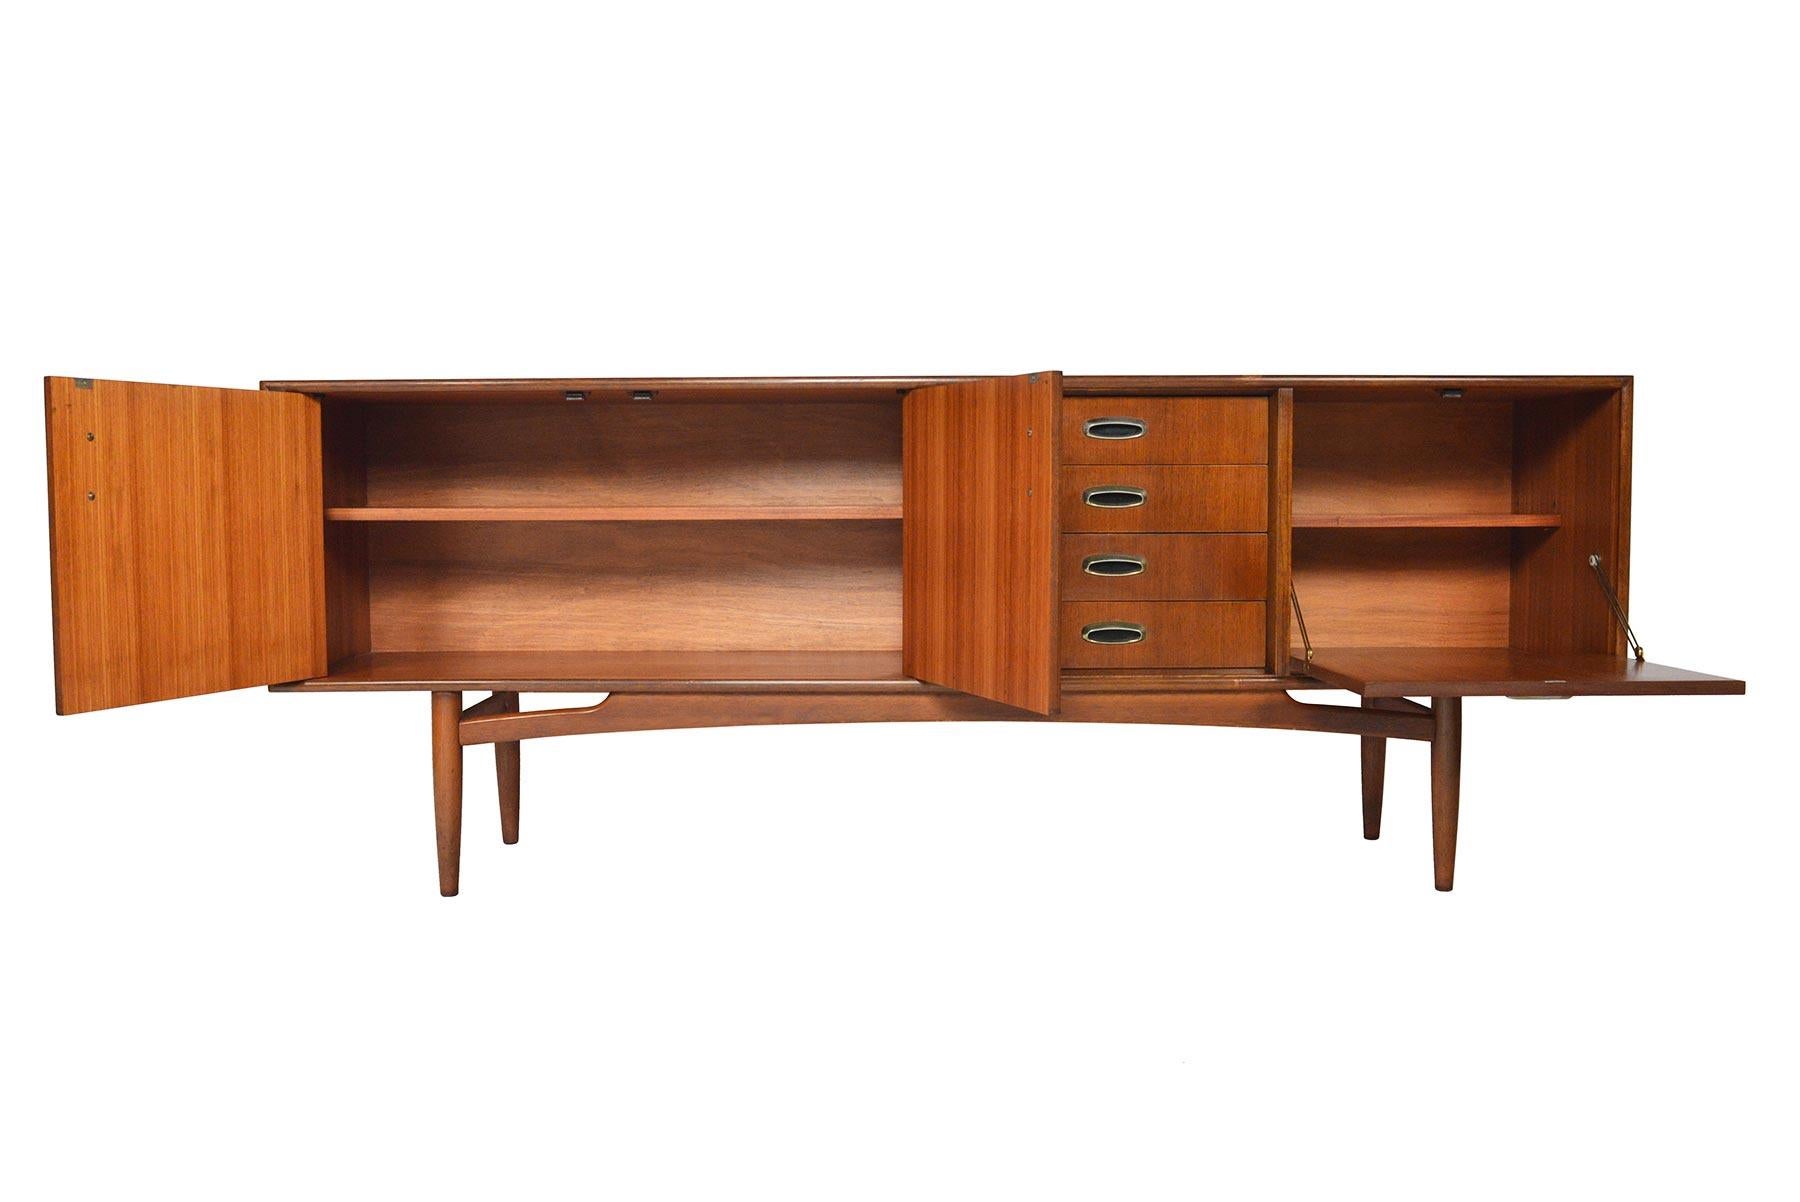 This English modern credenza is crafted in mahogany as part of G Plan’s Scandinavian range of the 1960s. A large left bay opens to reveal an adjustable shelf. A bank of four drawers sit to the left of drop down bar cabinet. Doors and drawers are